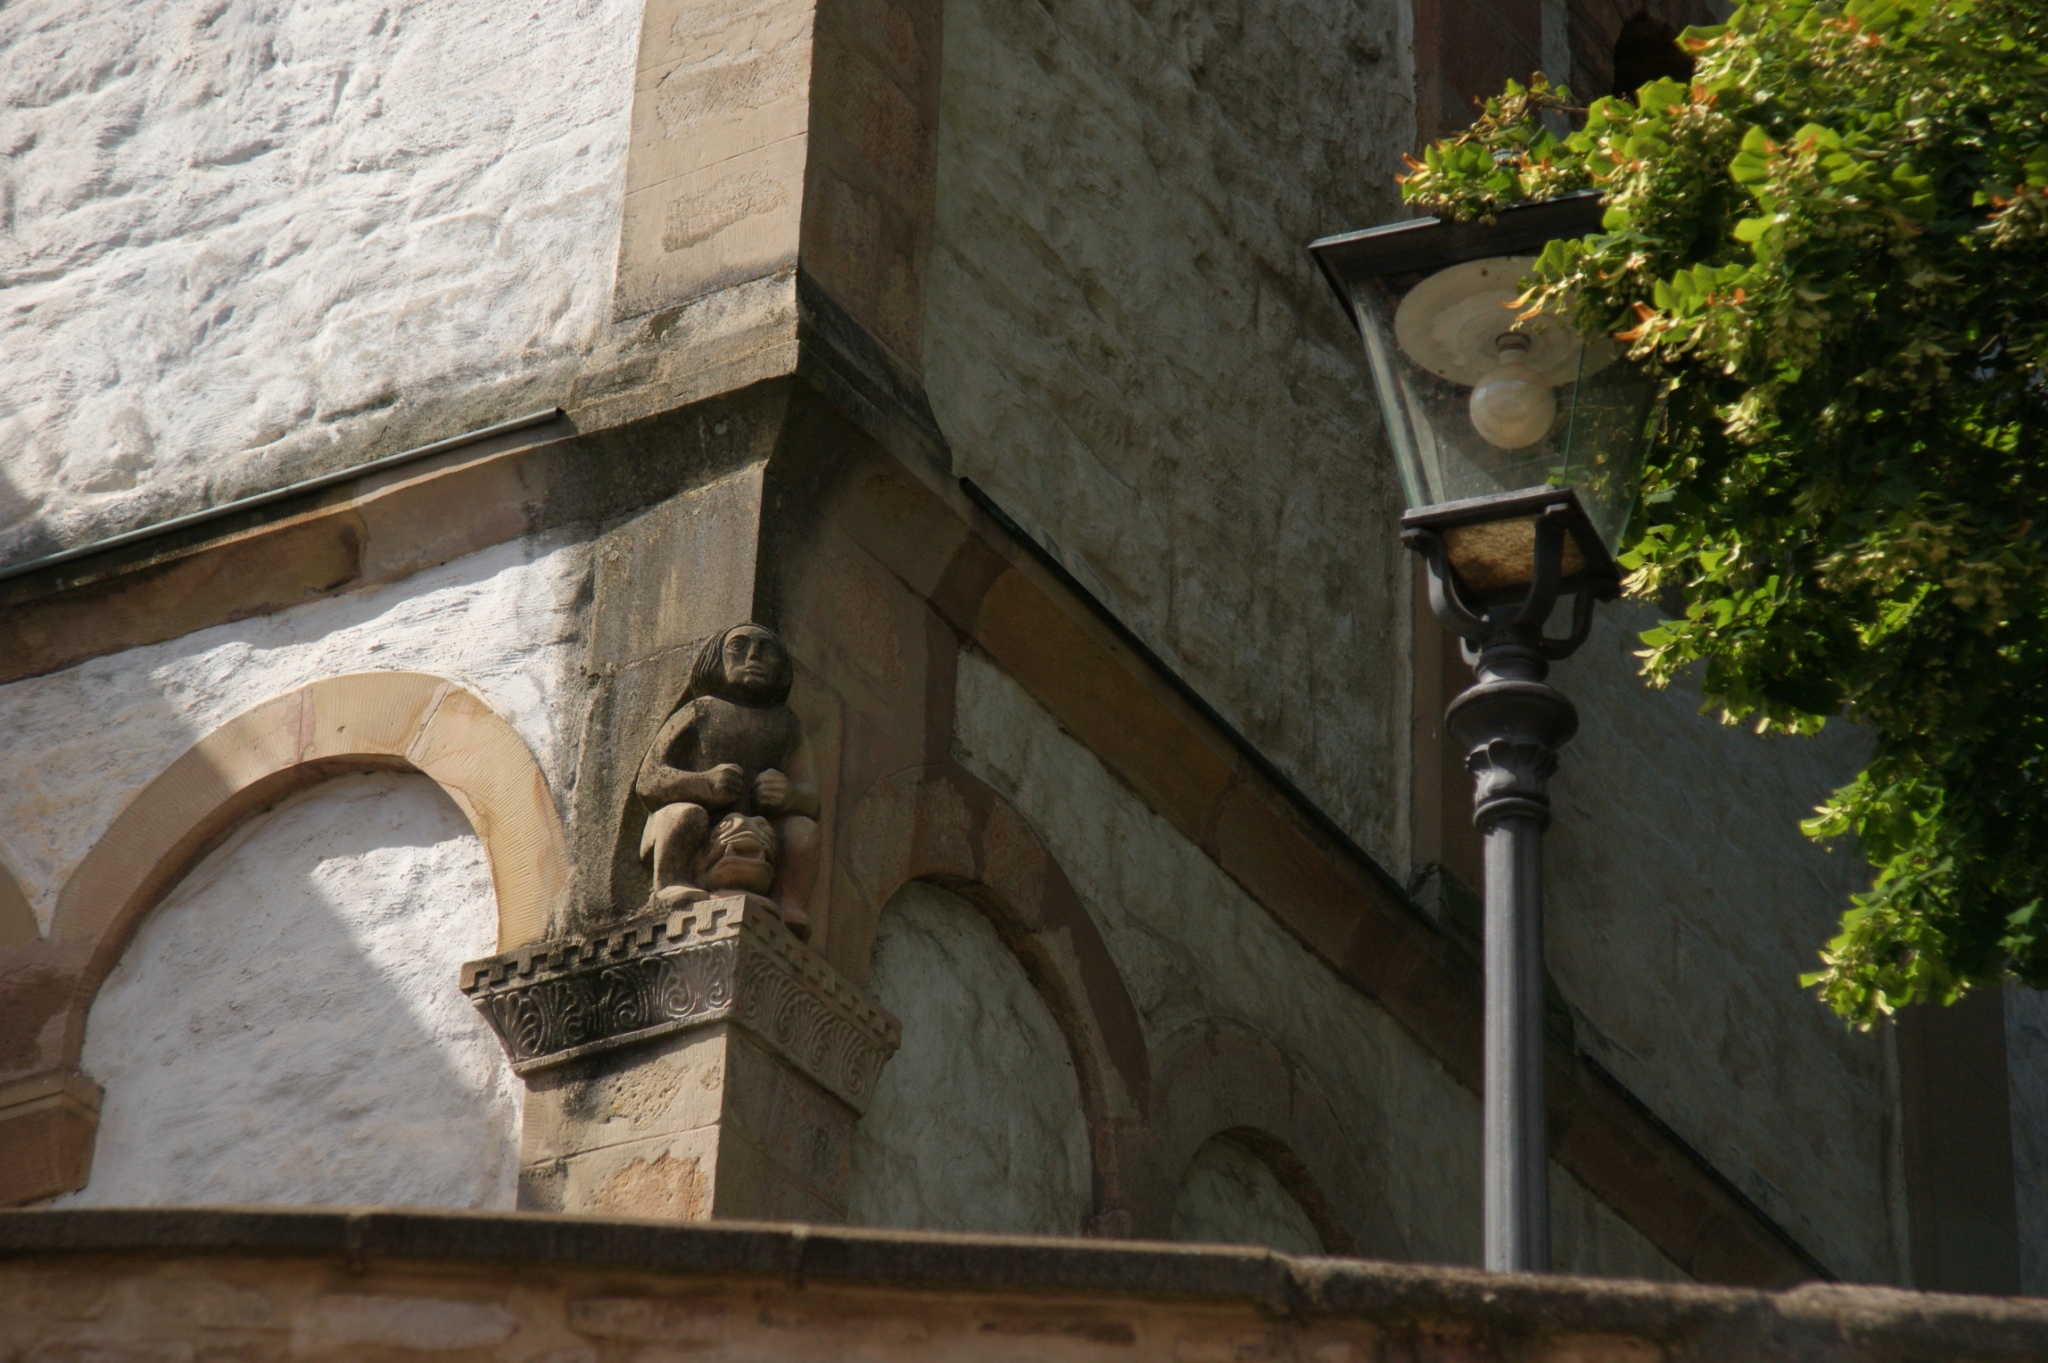 there are statues and a street light attached to a stone building